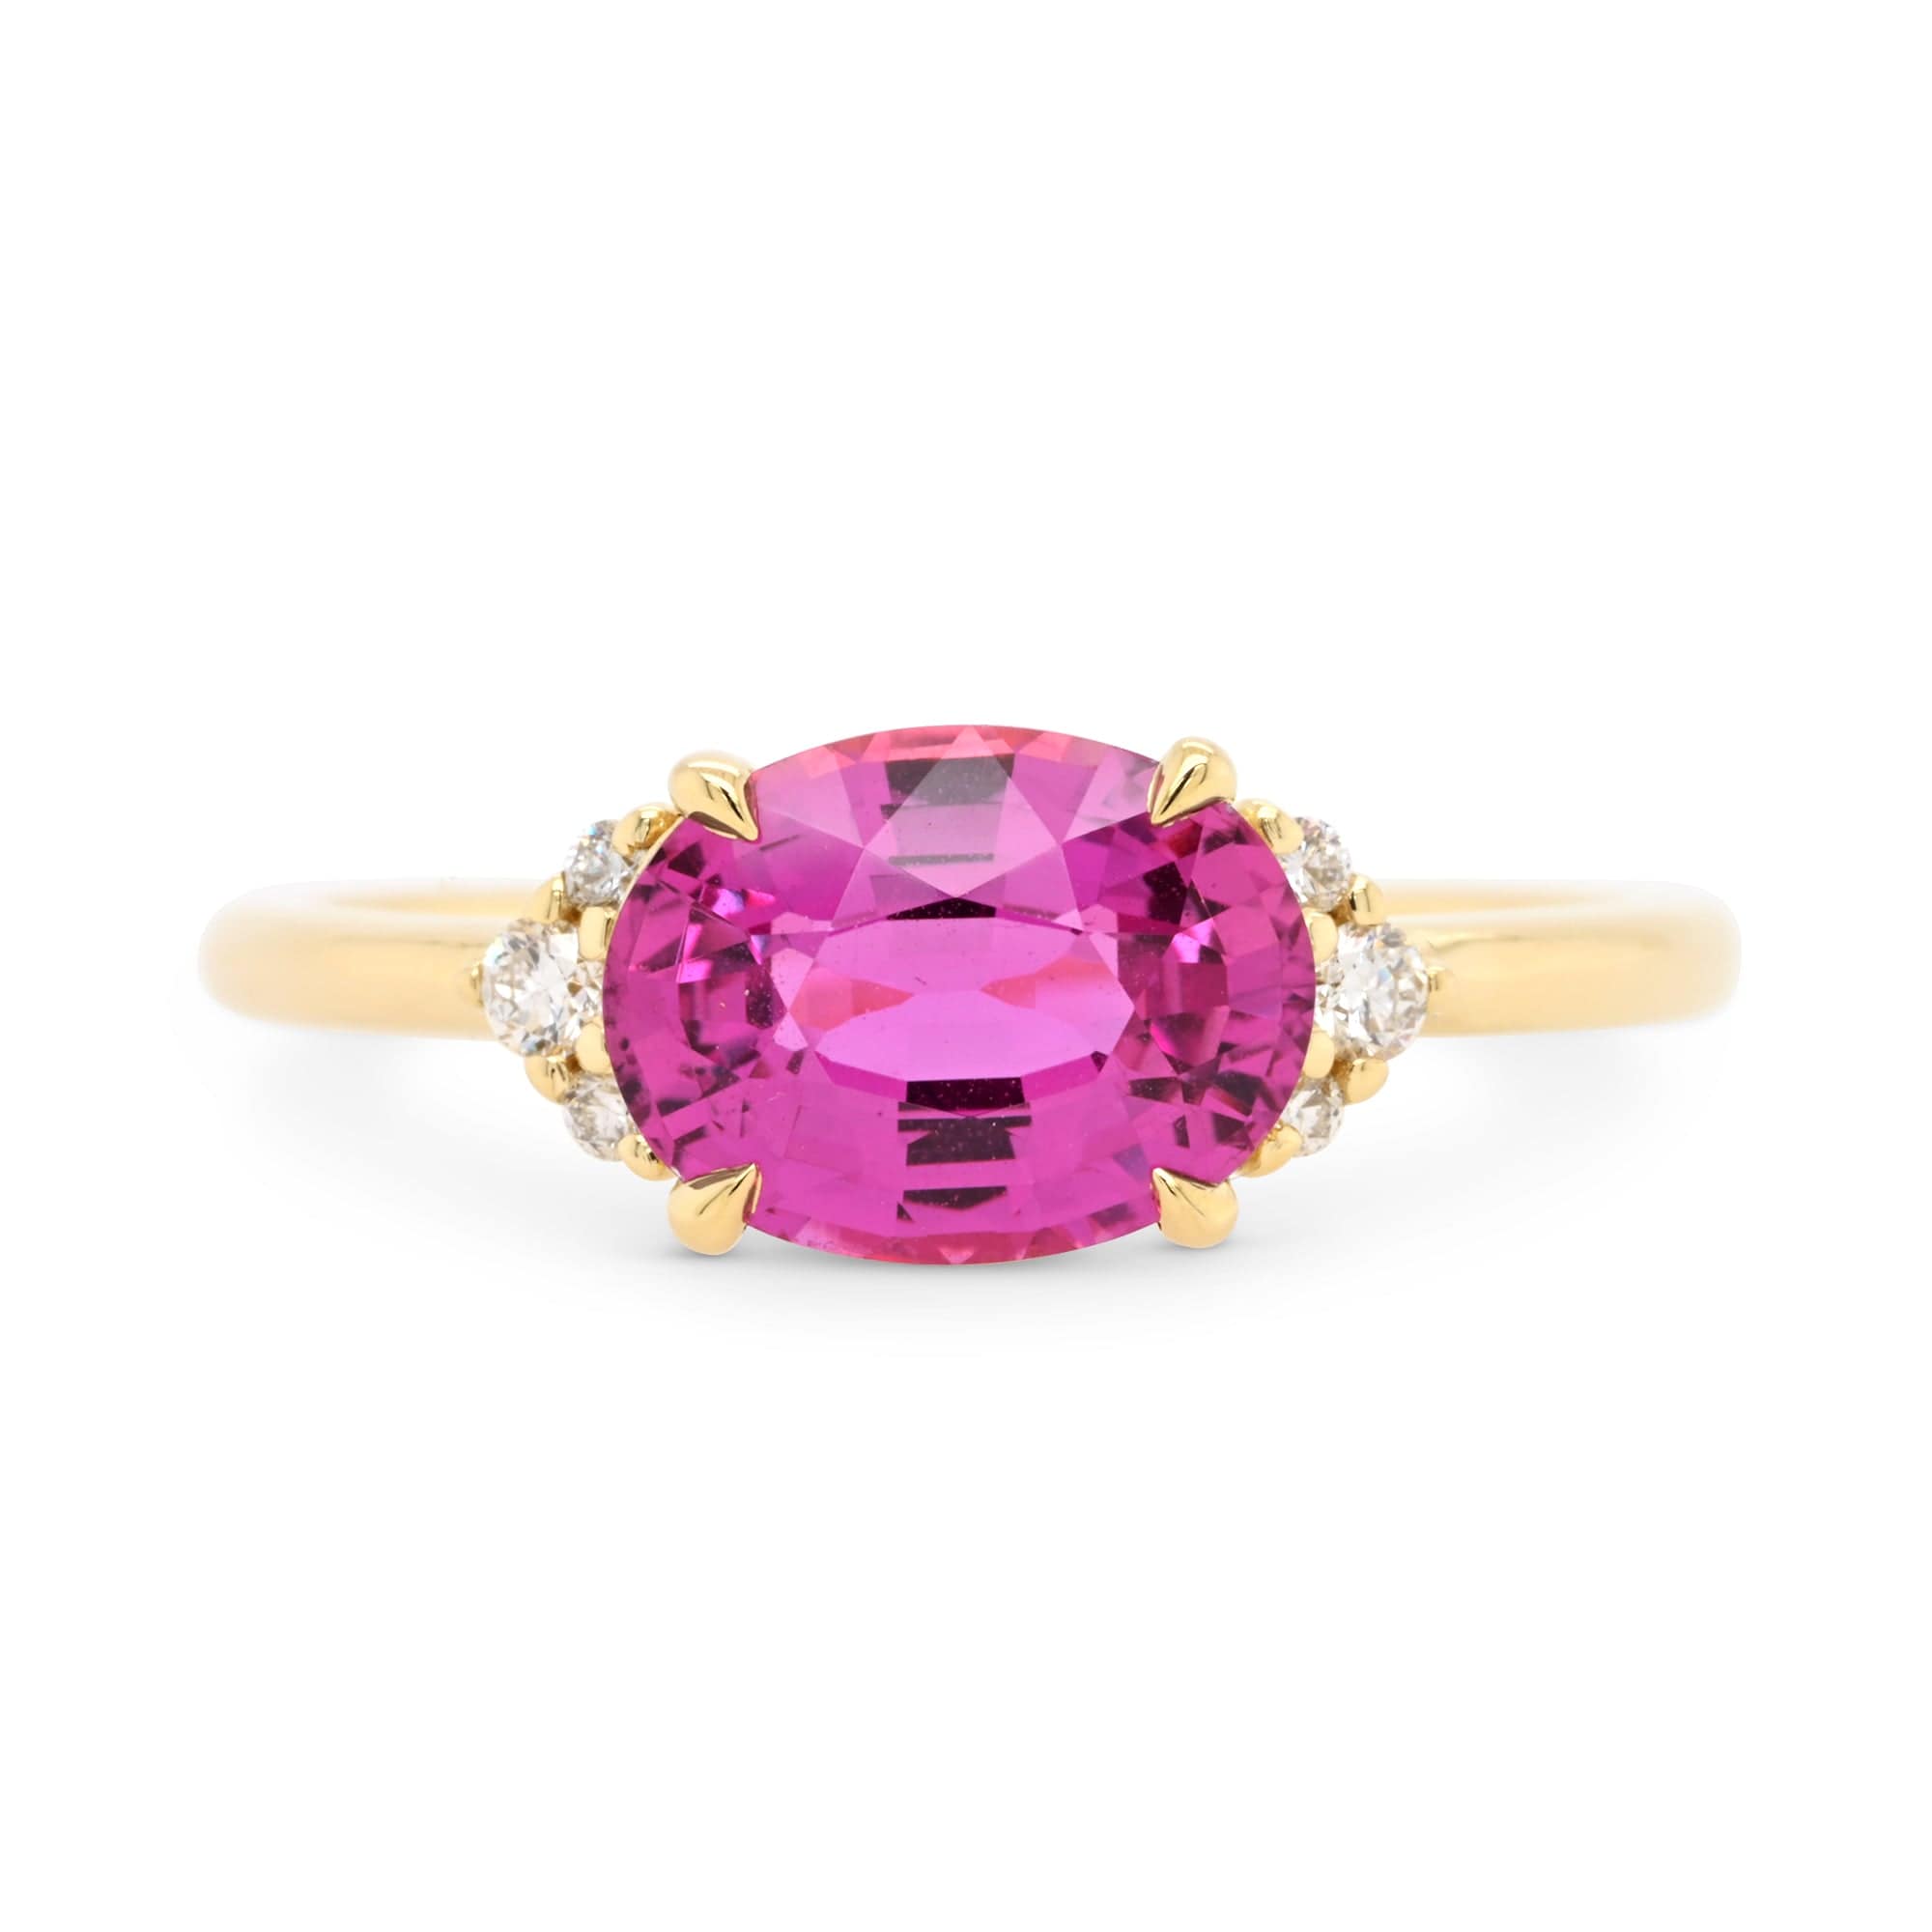 14k yellow gold engagement ring with pink oval-cut sapphire and diamonds